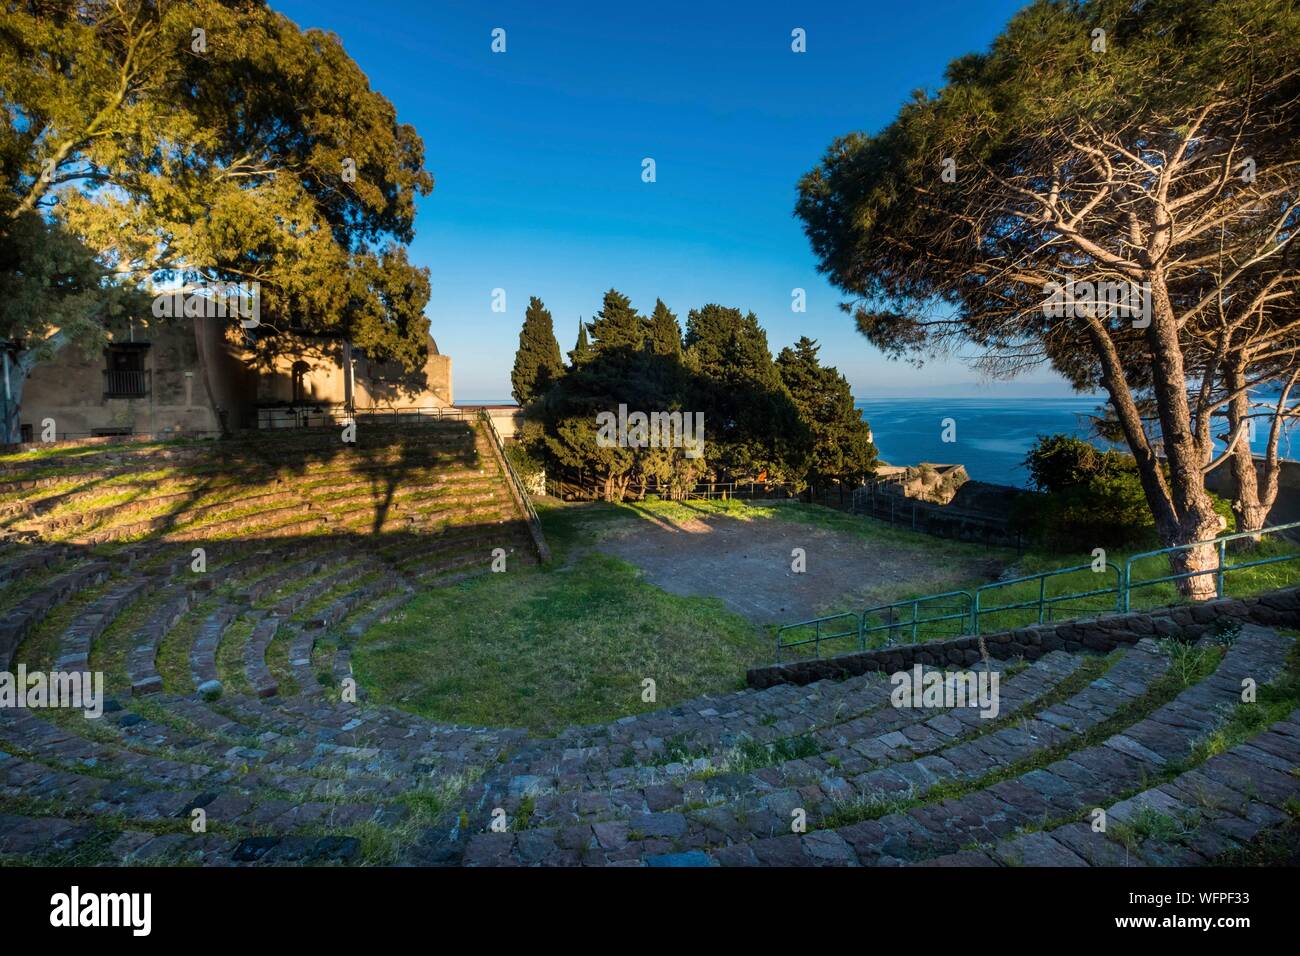 Italy, Sicily, Eolian Islands listed as World Heritage by UNESCO, Lipari, Greek-Roman amphitheater (4th-2nd centurry B.C.) in the citadel's gardens Stock Photo